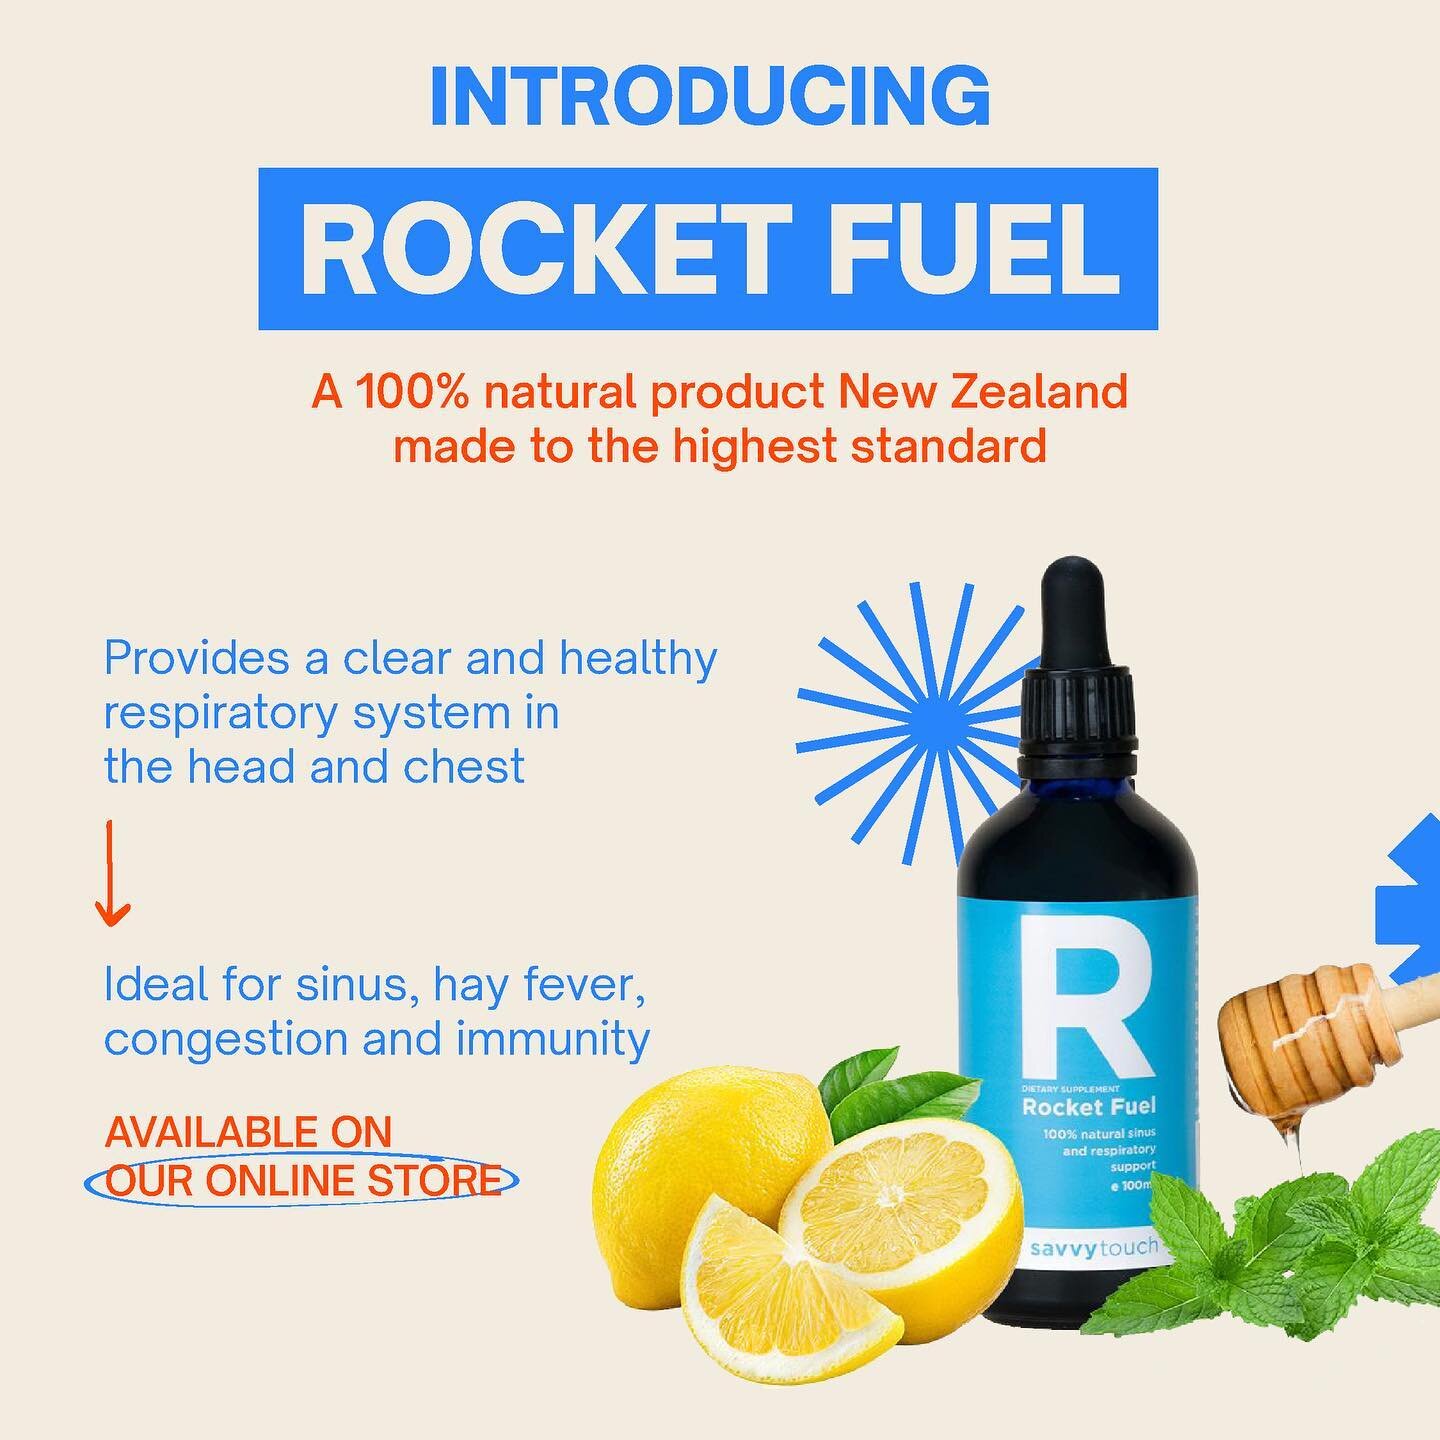 Meet one of our BEST SELLERS💥
Here to aid sickness and improve your overall respiratory health. Rocket Fuel is 100% natural - no nasties, no worries! Link in bio. 👀